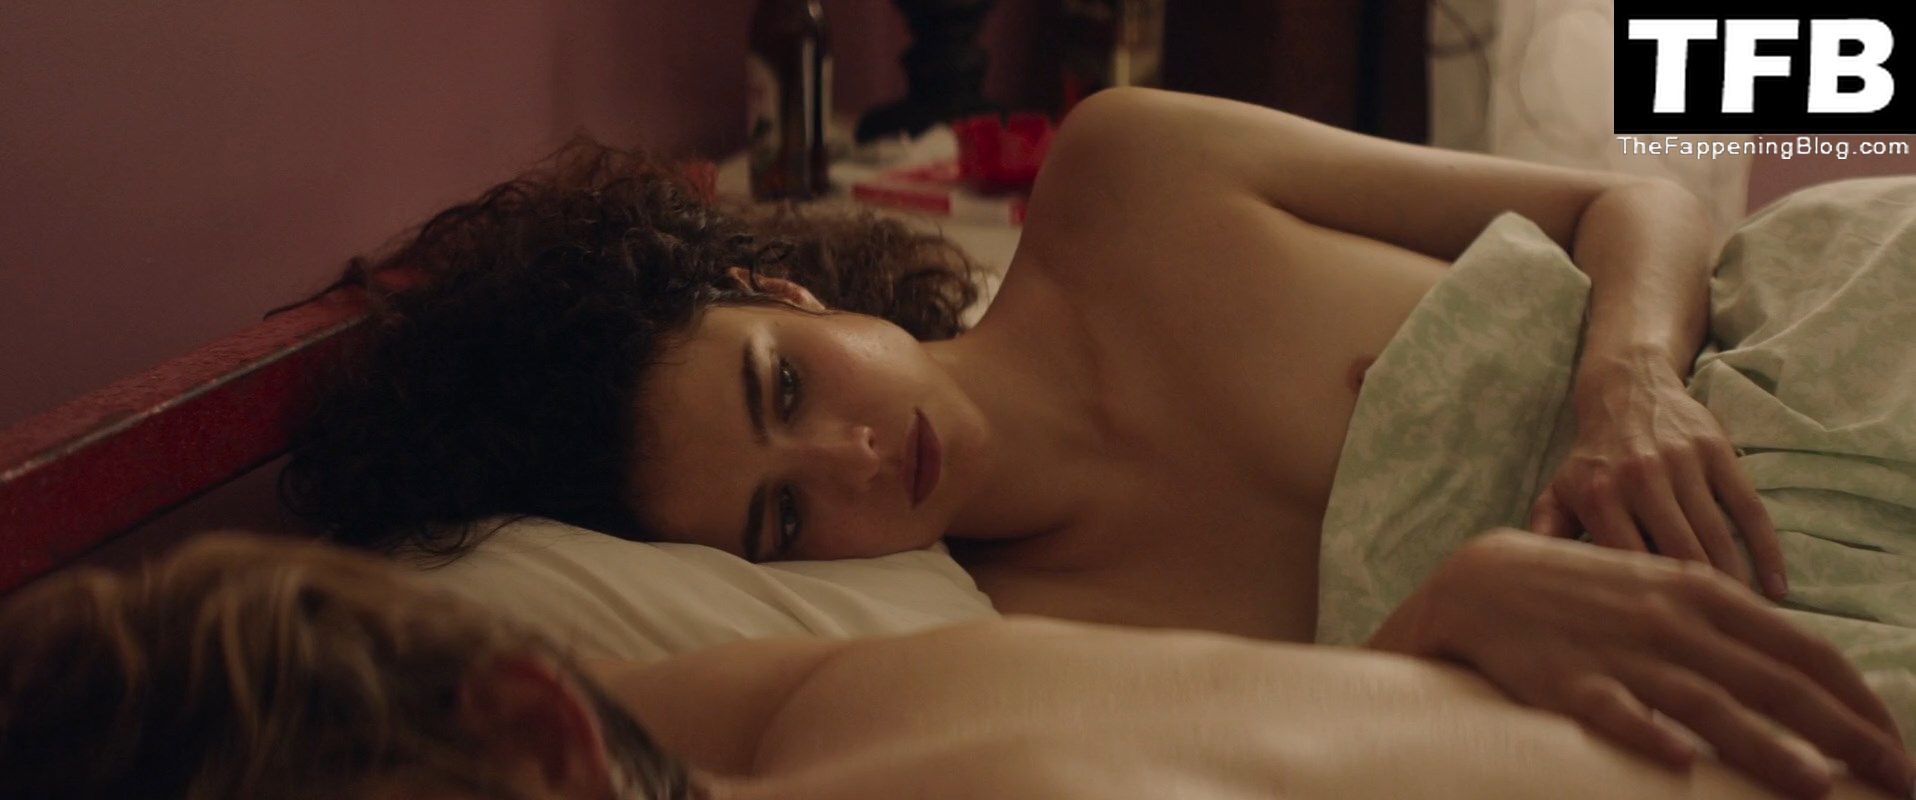 Margaret-Qualley-Nude-Sexy-Stars-at-Noon-The-Fappening-Blog-5.jpg